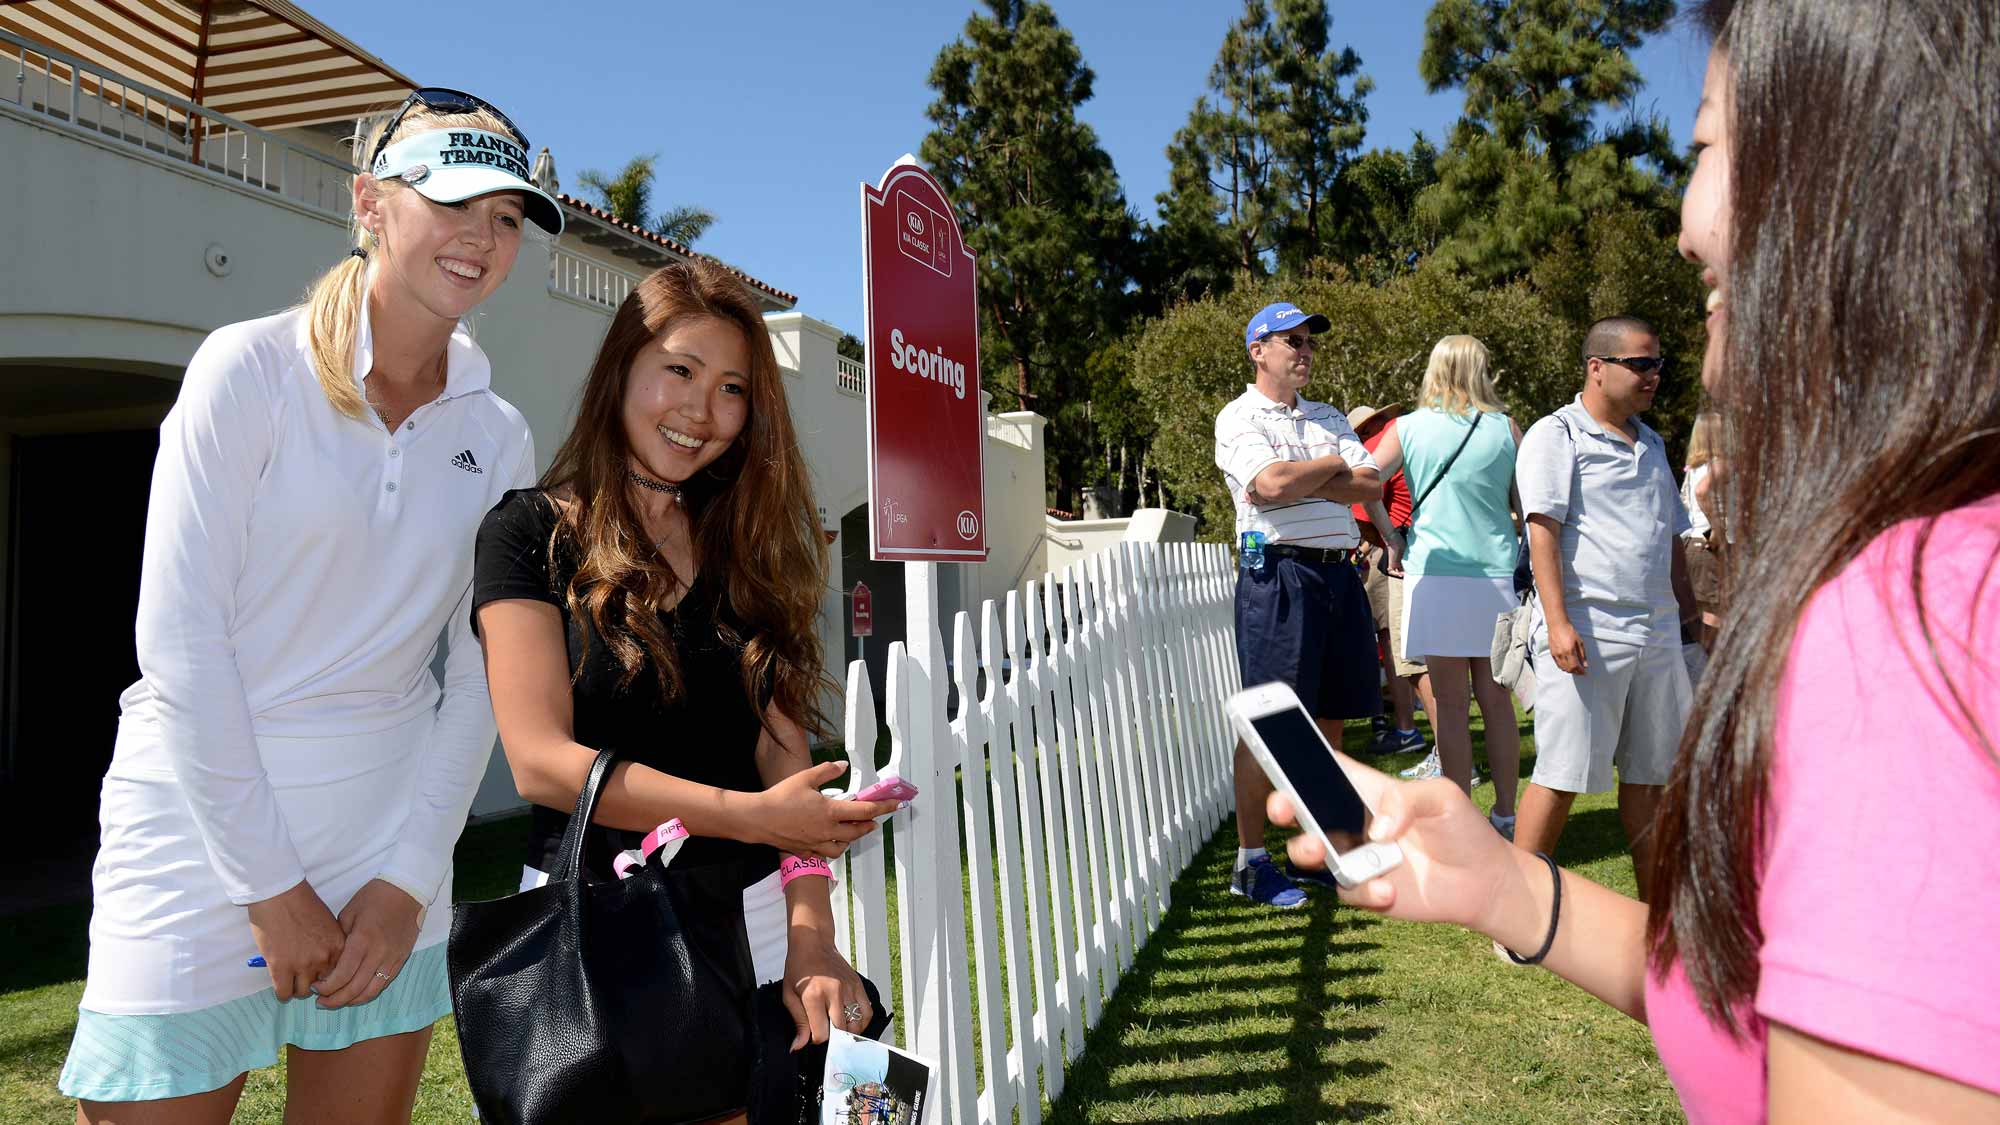 Jessica Korda poses for a photo with fans during Round Three of the LPGA KIA Classic at the Aviara Golf Club